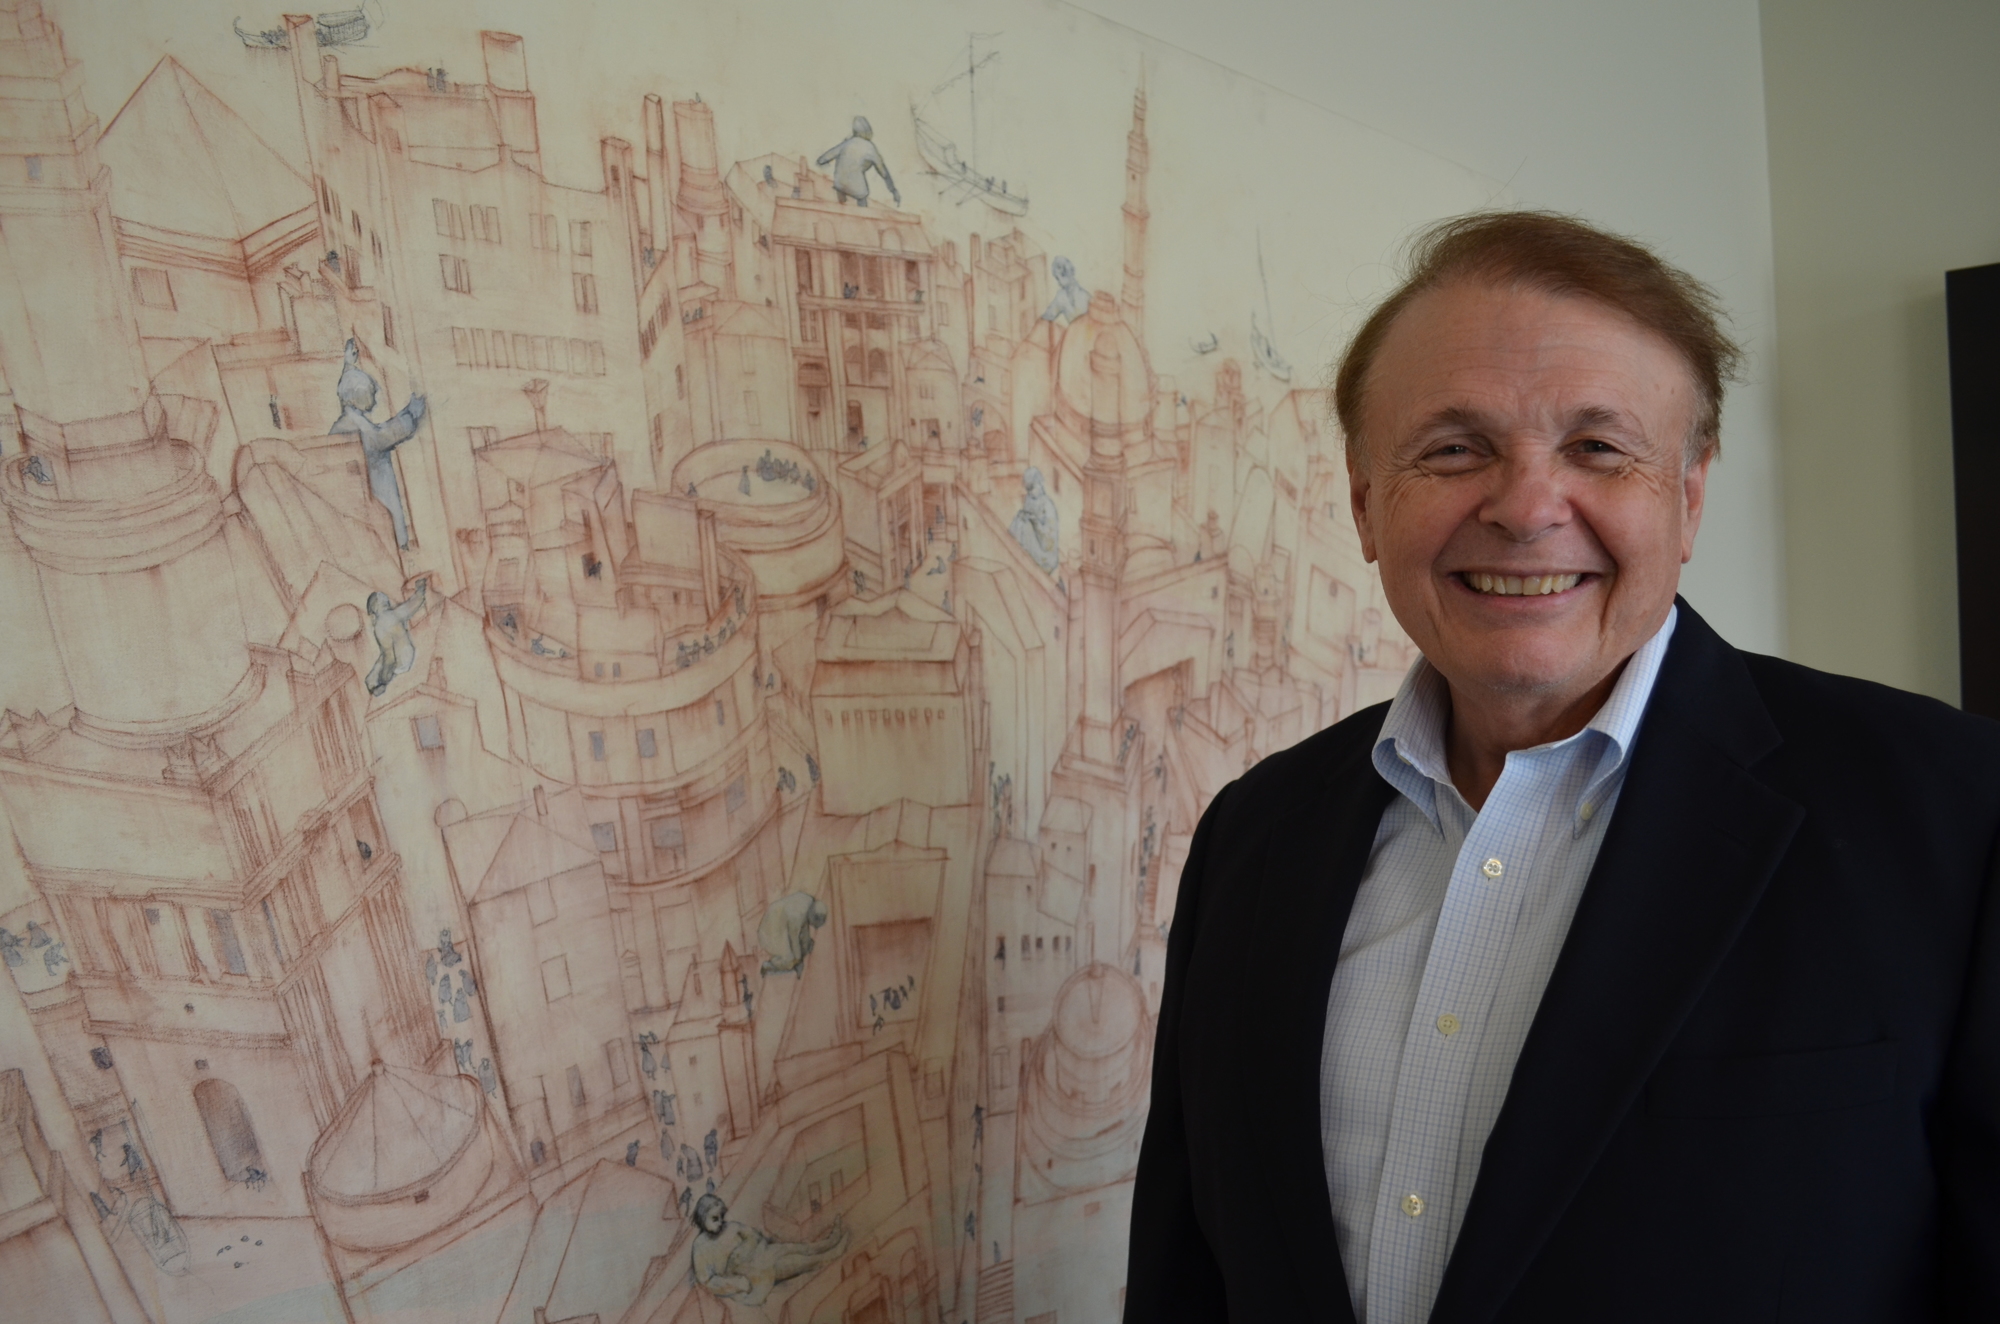 At least in the short term, Ringling College of Art and Design President Larry Thompson said it is unlikely for the college to resume a partnership with the town of Longboat Key in building a Town Center.